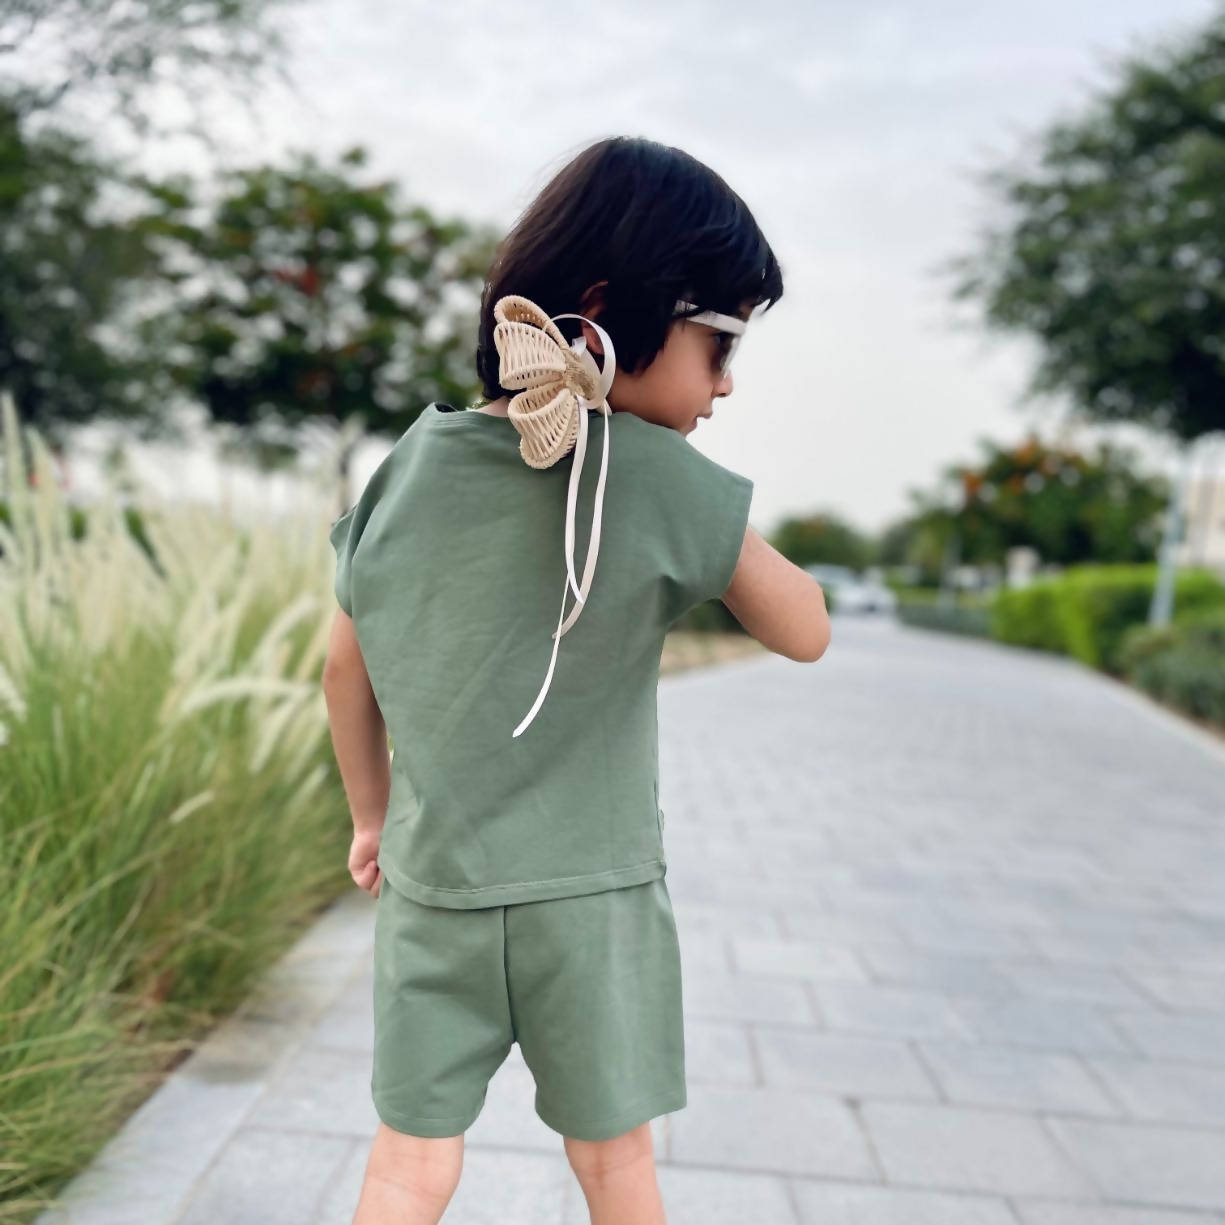 stylish outfit for boys 